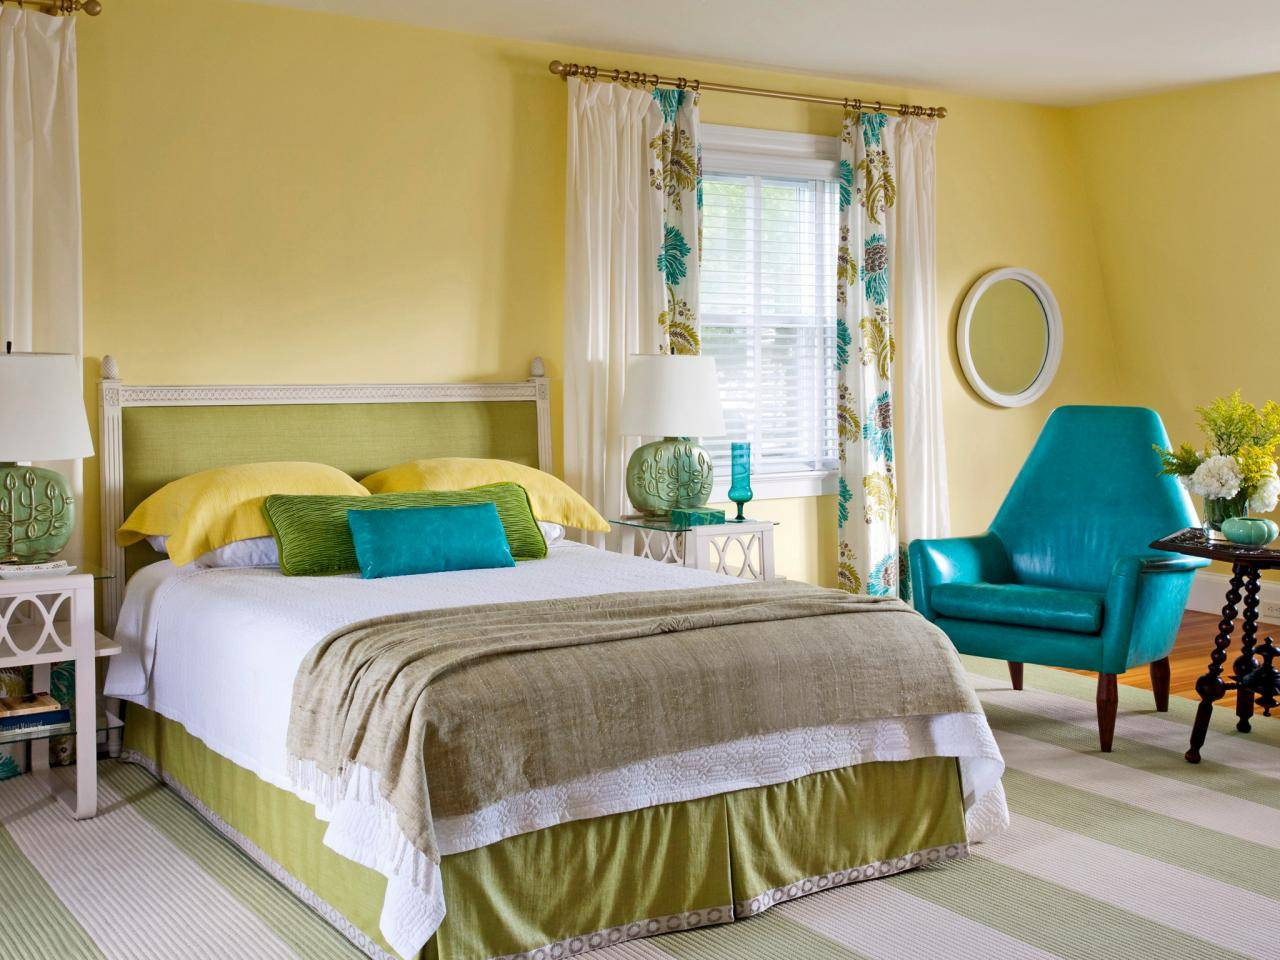 Yellow Walls Bedroom
 7 Amazing Bedroom Colors For Real Relax Interior Design